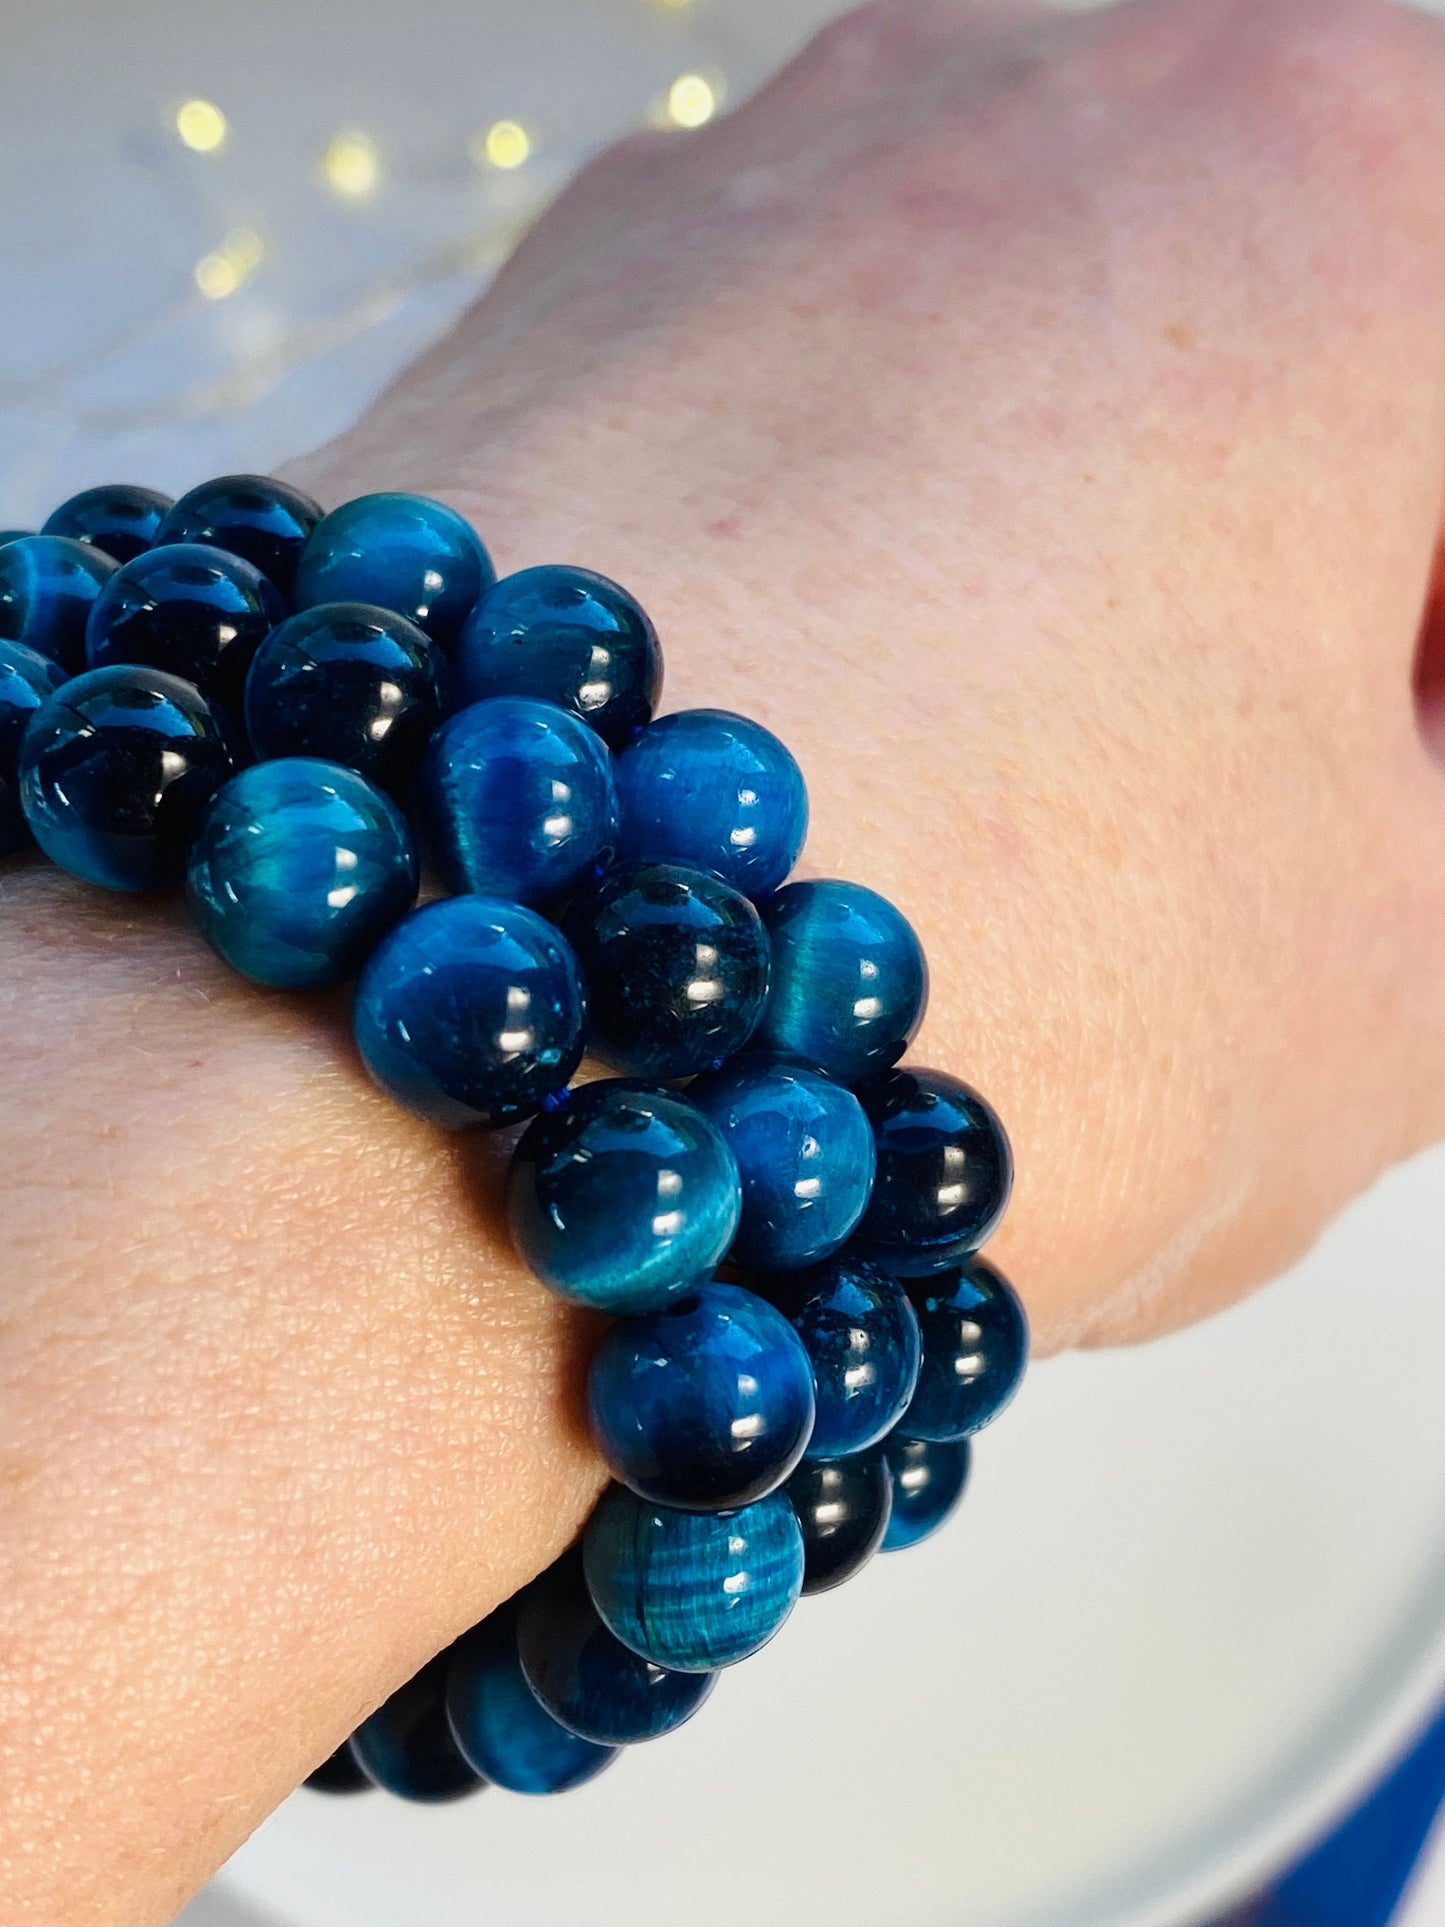 Blue Tigers Eye crystal bracelet, Stone of protection, Calm, Ease anxiety and stress.